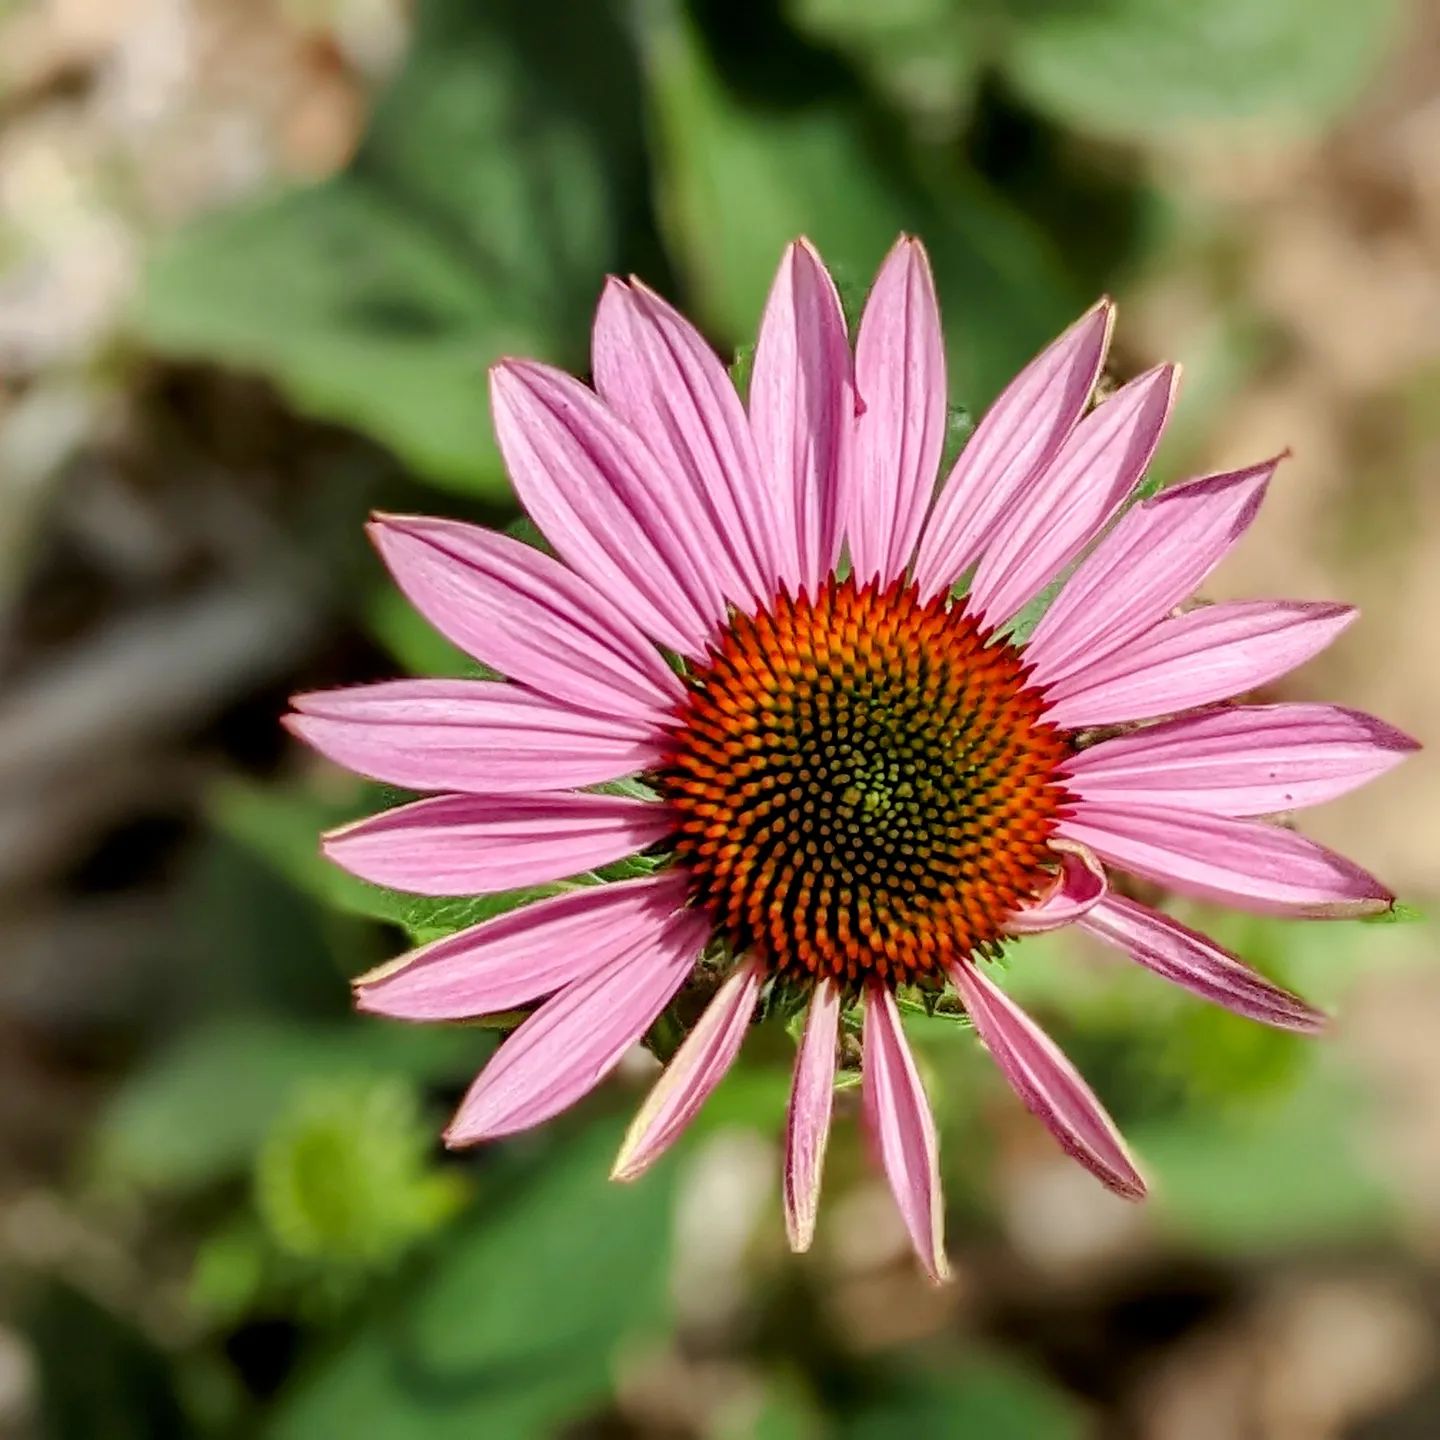 The echinacea keeps growing, still just as beautiful